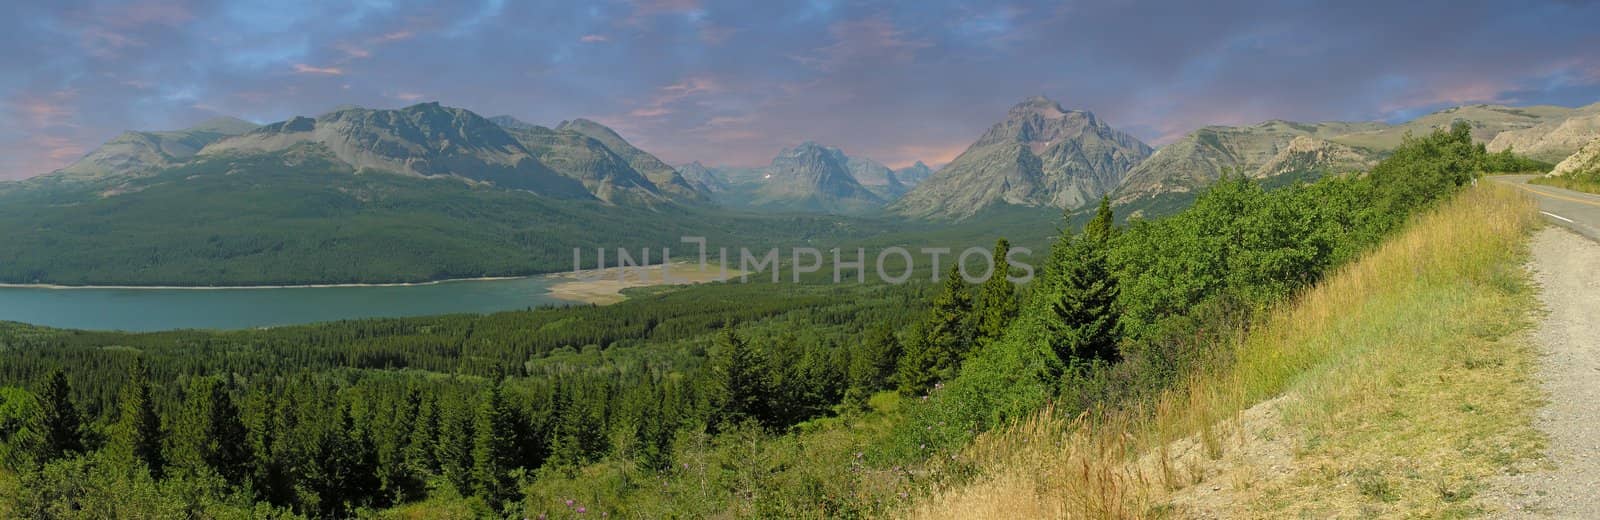 Panorama of Glacier National Park by jovannig